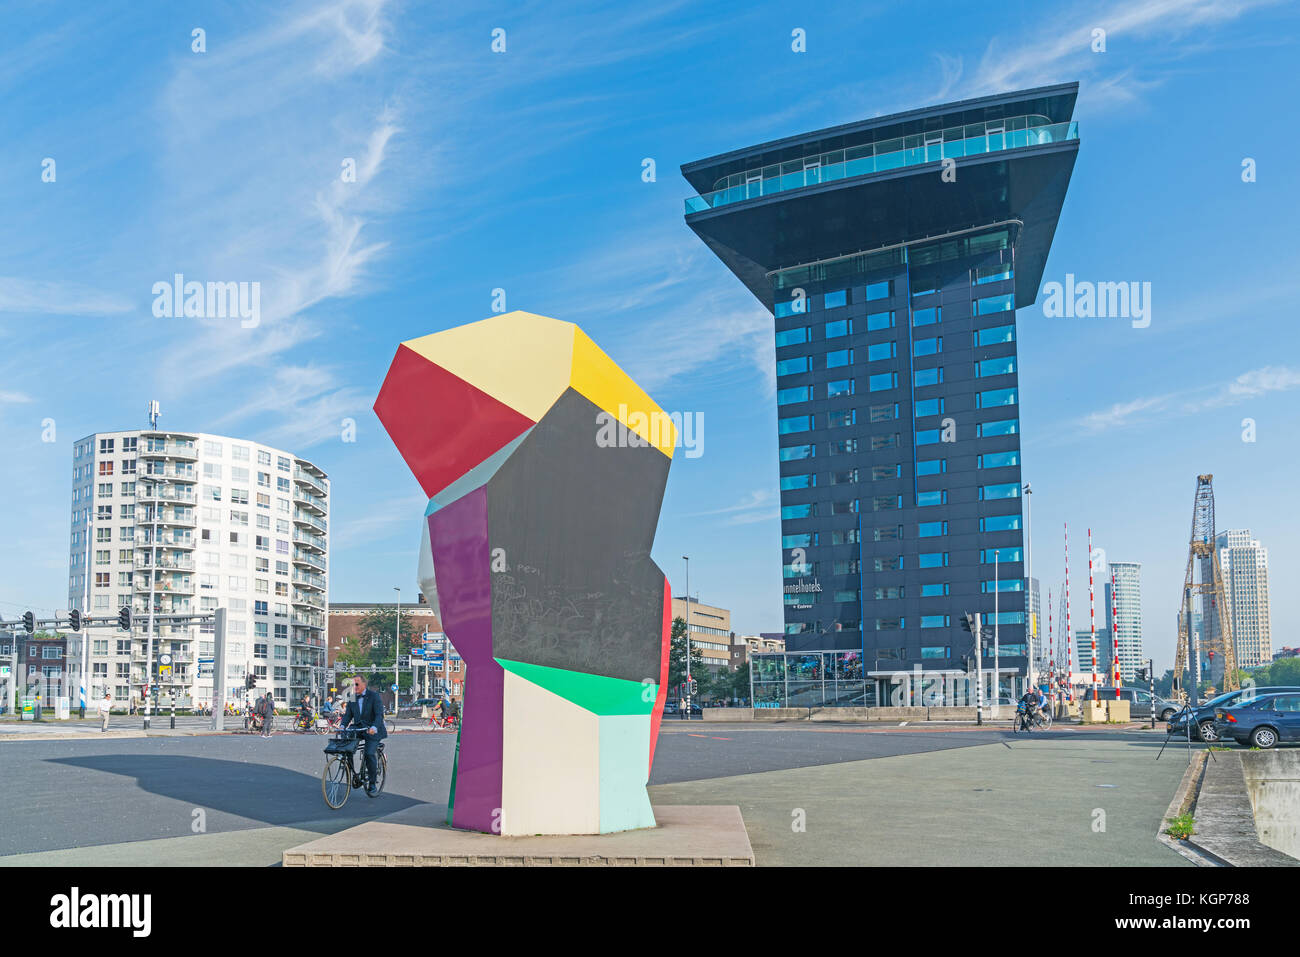 ROTTERDAM, HOLLAND -AUGUST 22, 2017; Man cycles past multi-colored cubic Marathon Image sculpture in Erasmuburg district with one of city's stunning m Stock Photo